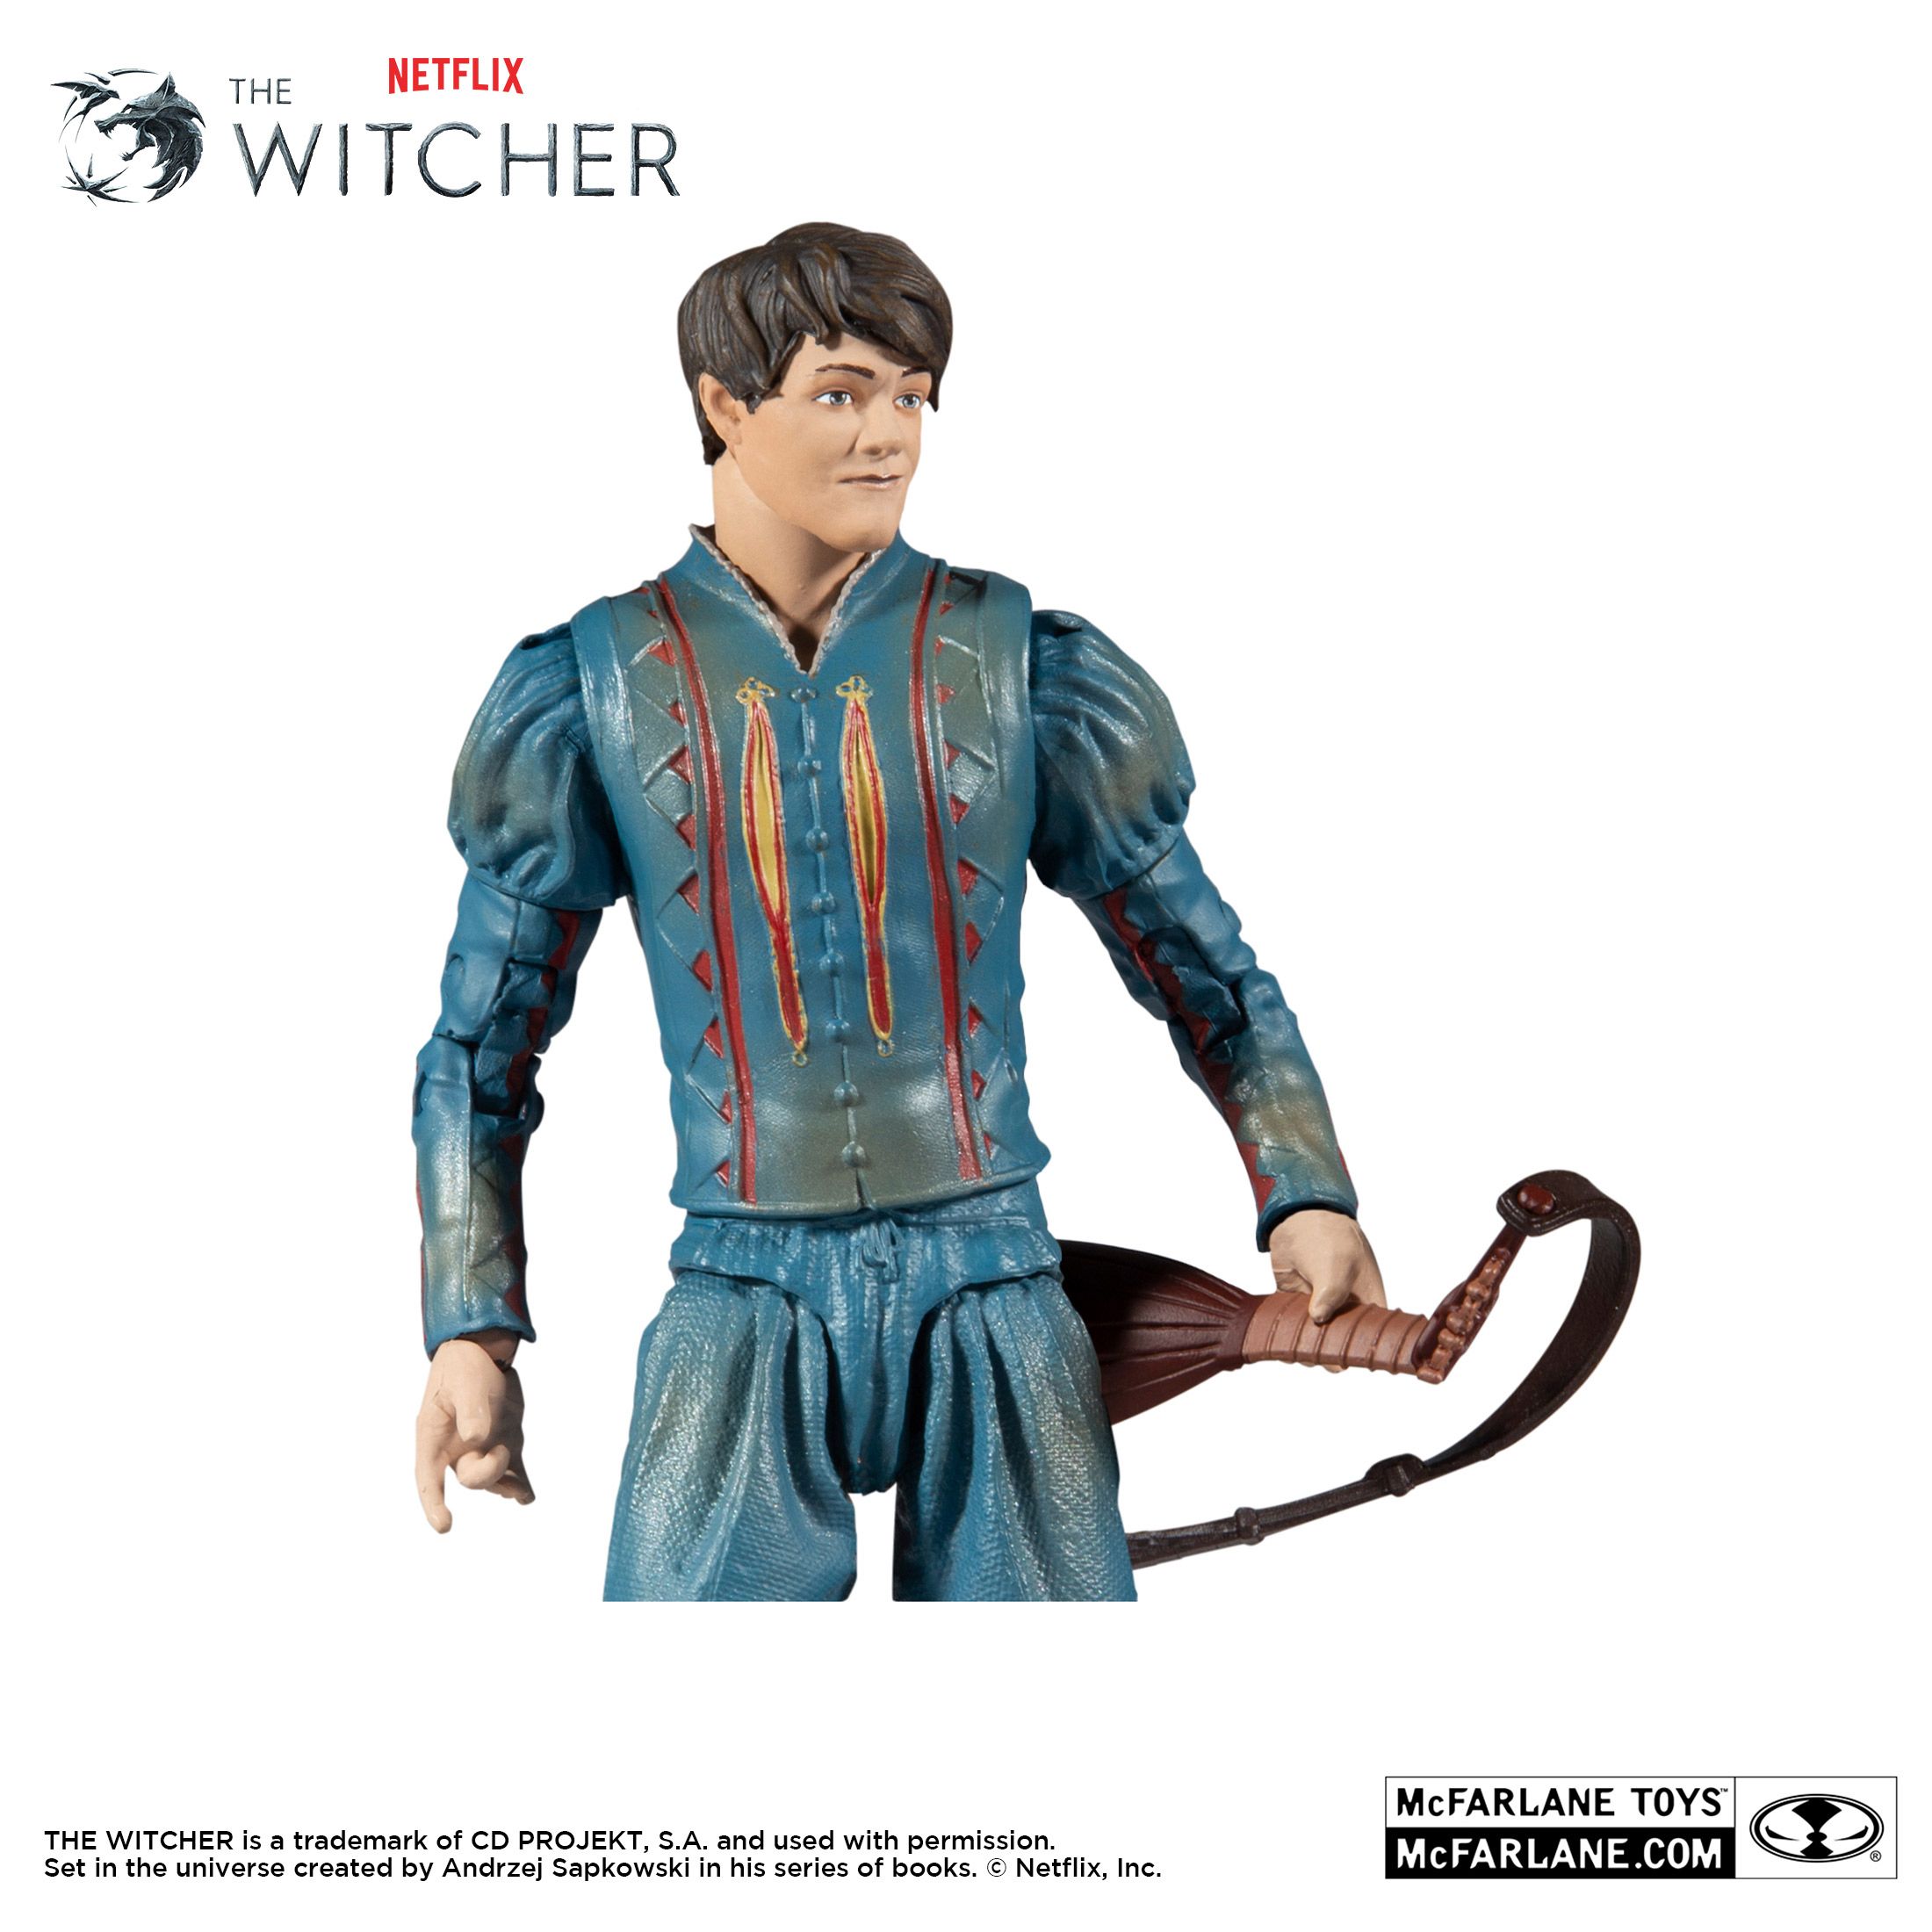 The Witcher Netflix McFarlane Toys images #4